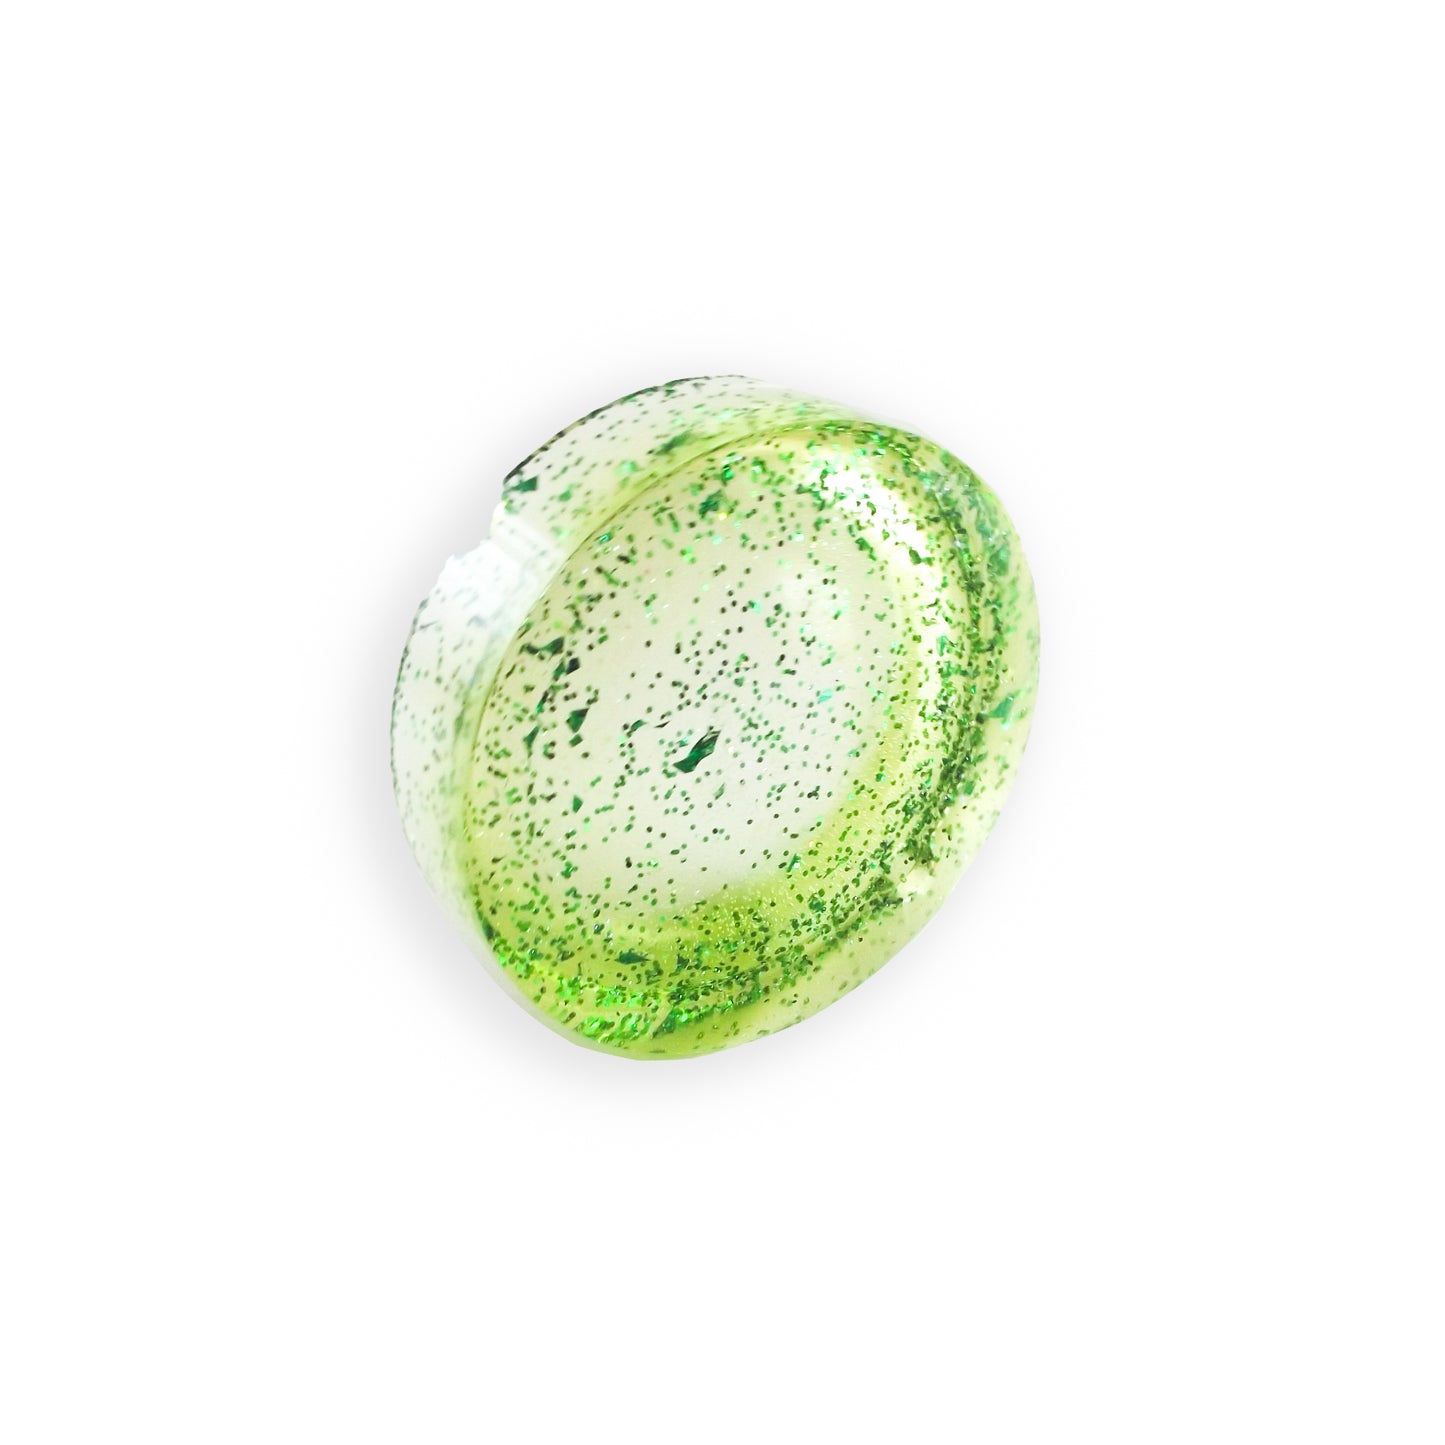 Image of a sparkling green CanEmpire resin ashtray from CanArt collection. This handcrafted piece made of eco-friendly resin offers heat protection as well as unmatched style & durability.